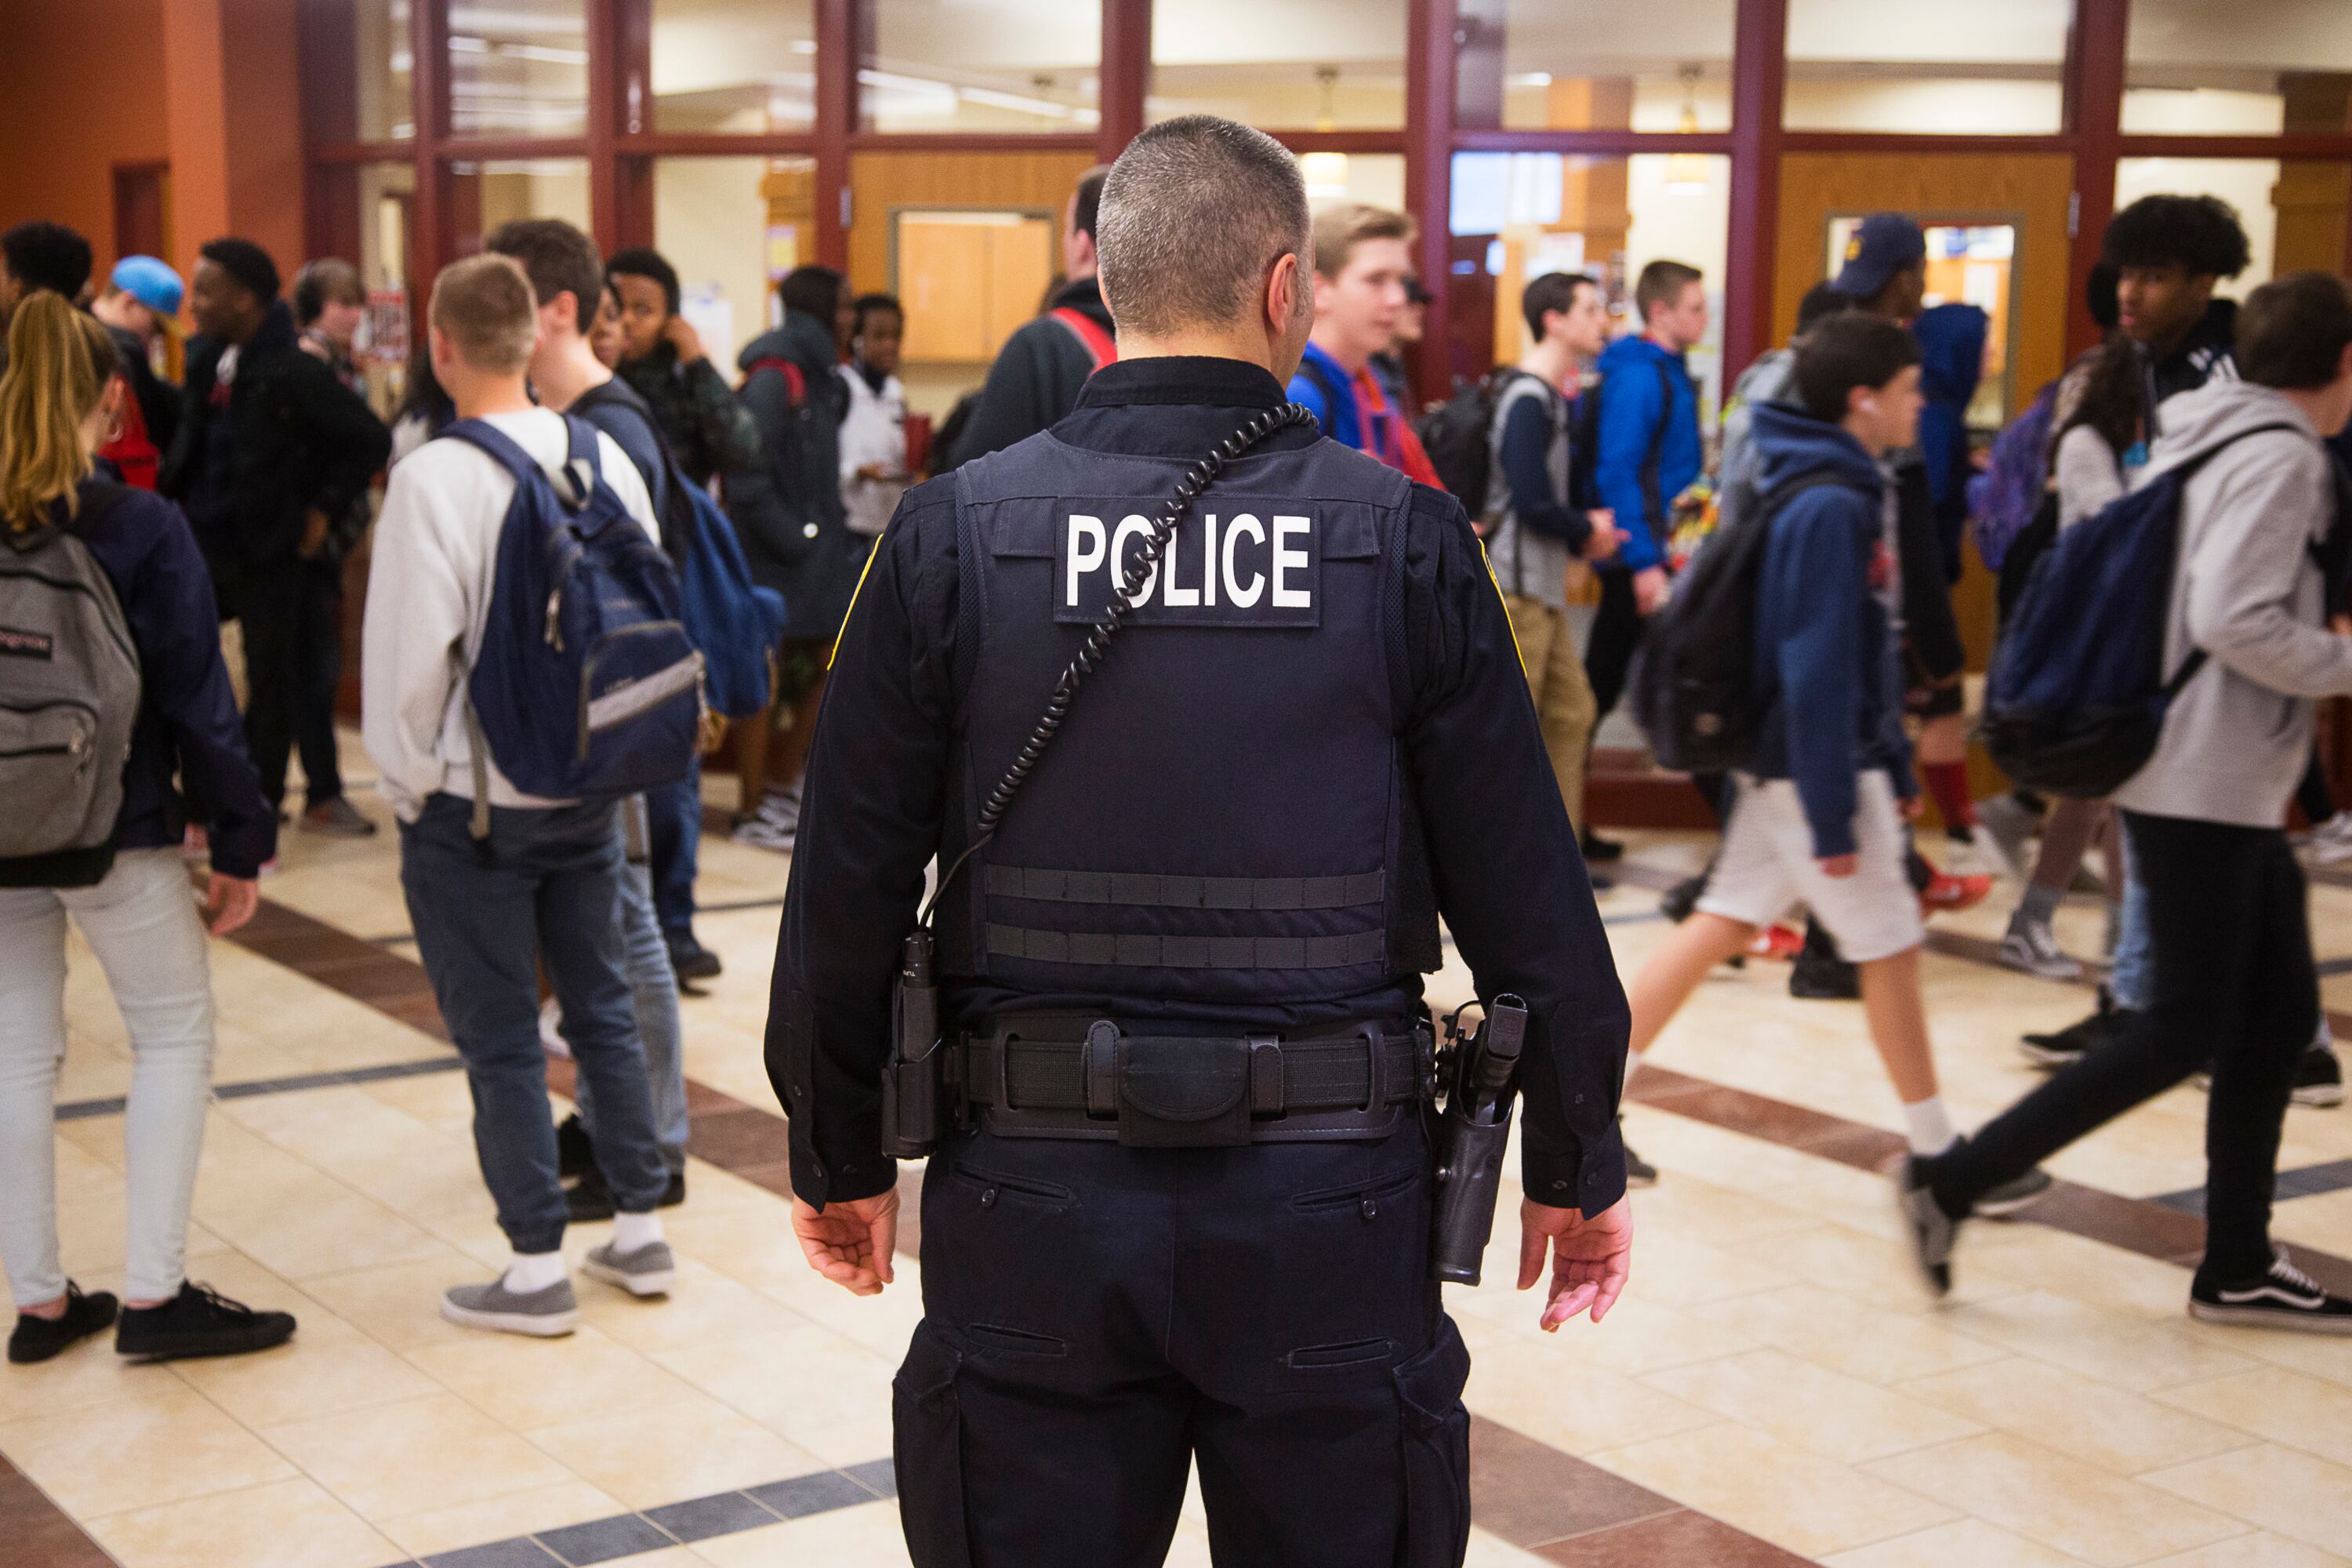 A 2018 photo shows an officer with “POLICE” marked on the back of his uniform stands in a high school hallway with students wearing backpacks walking by.